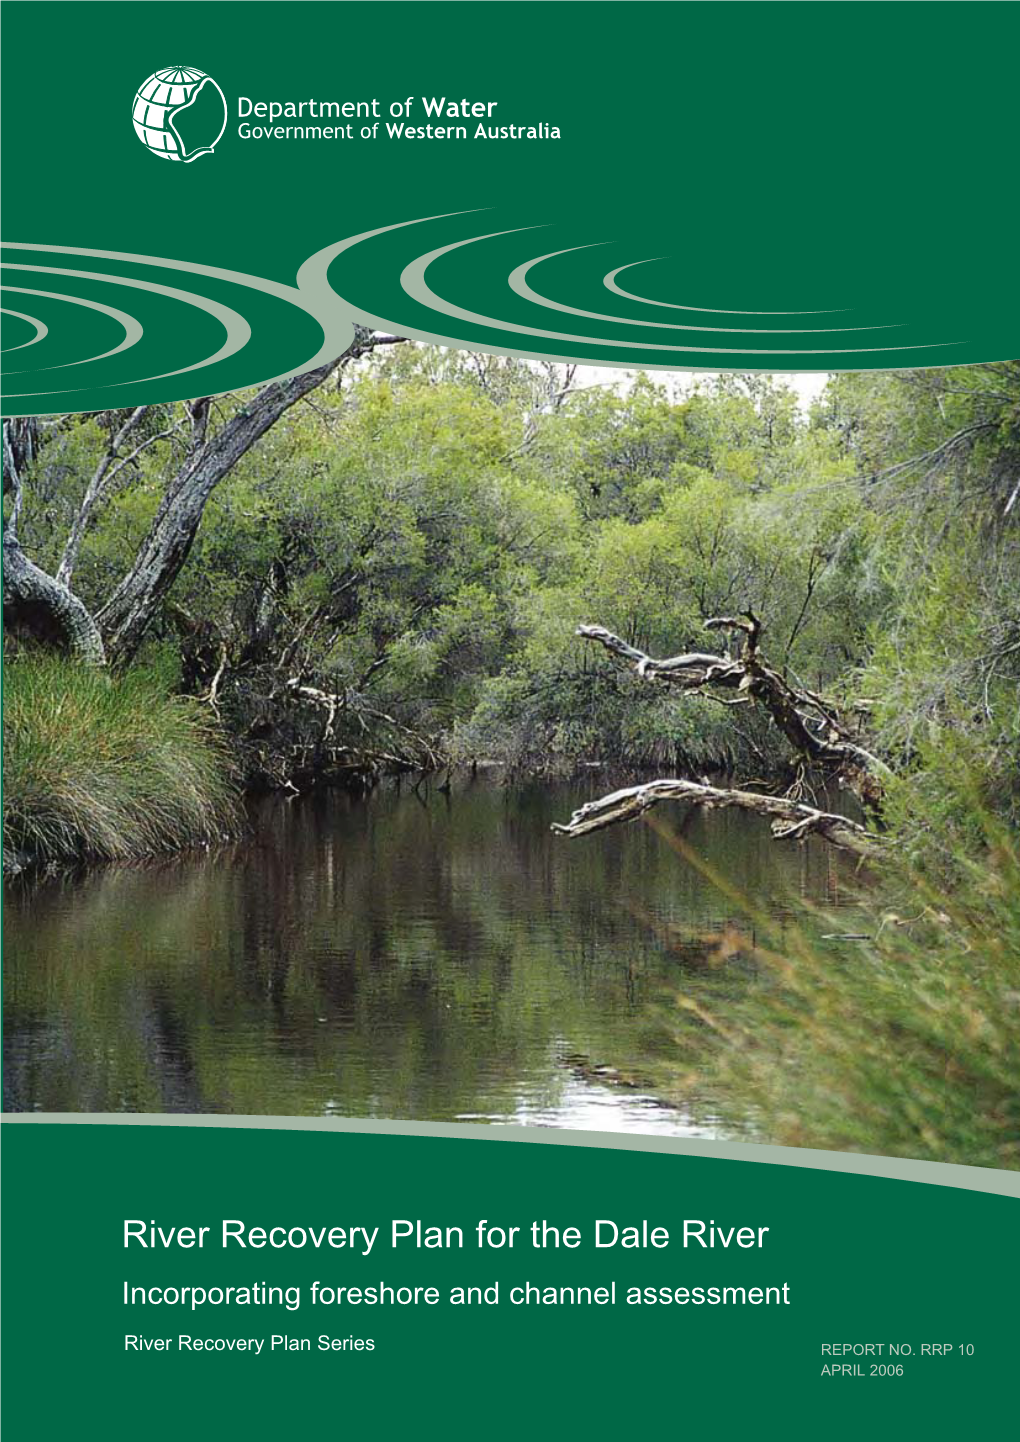 River Recovery Plan for the Dale River Incorporating Foreshore and Channel Assessment